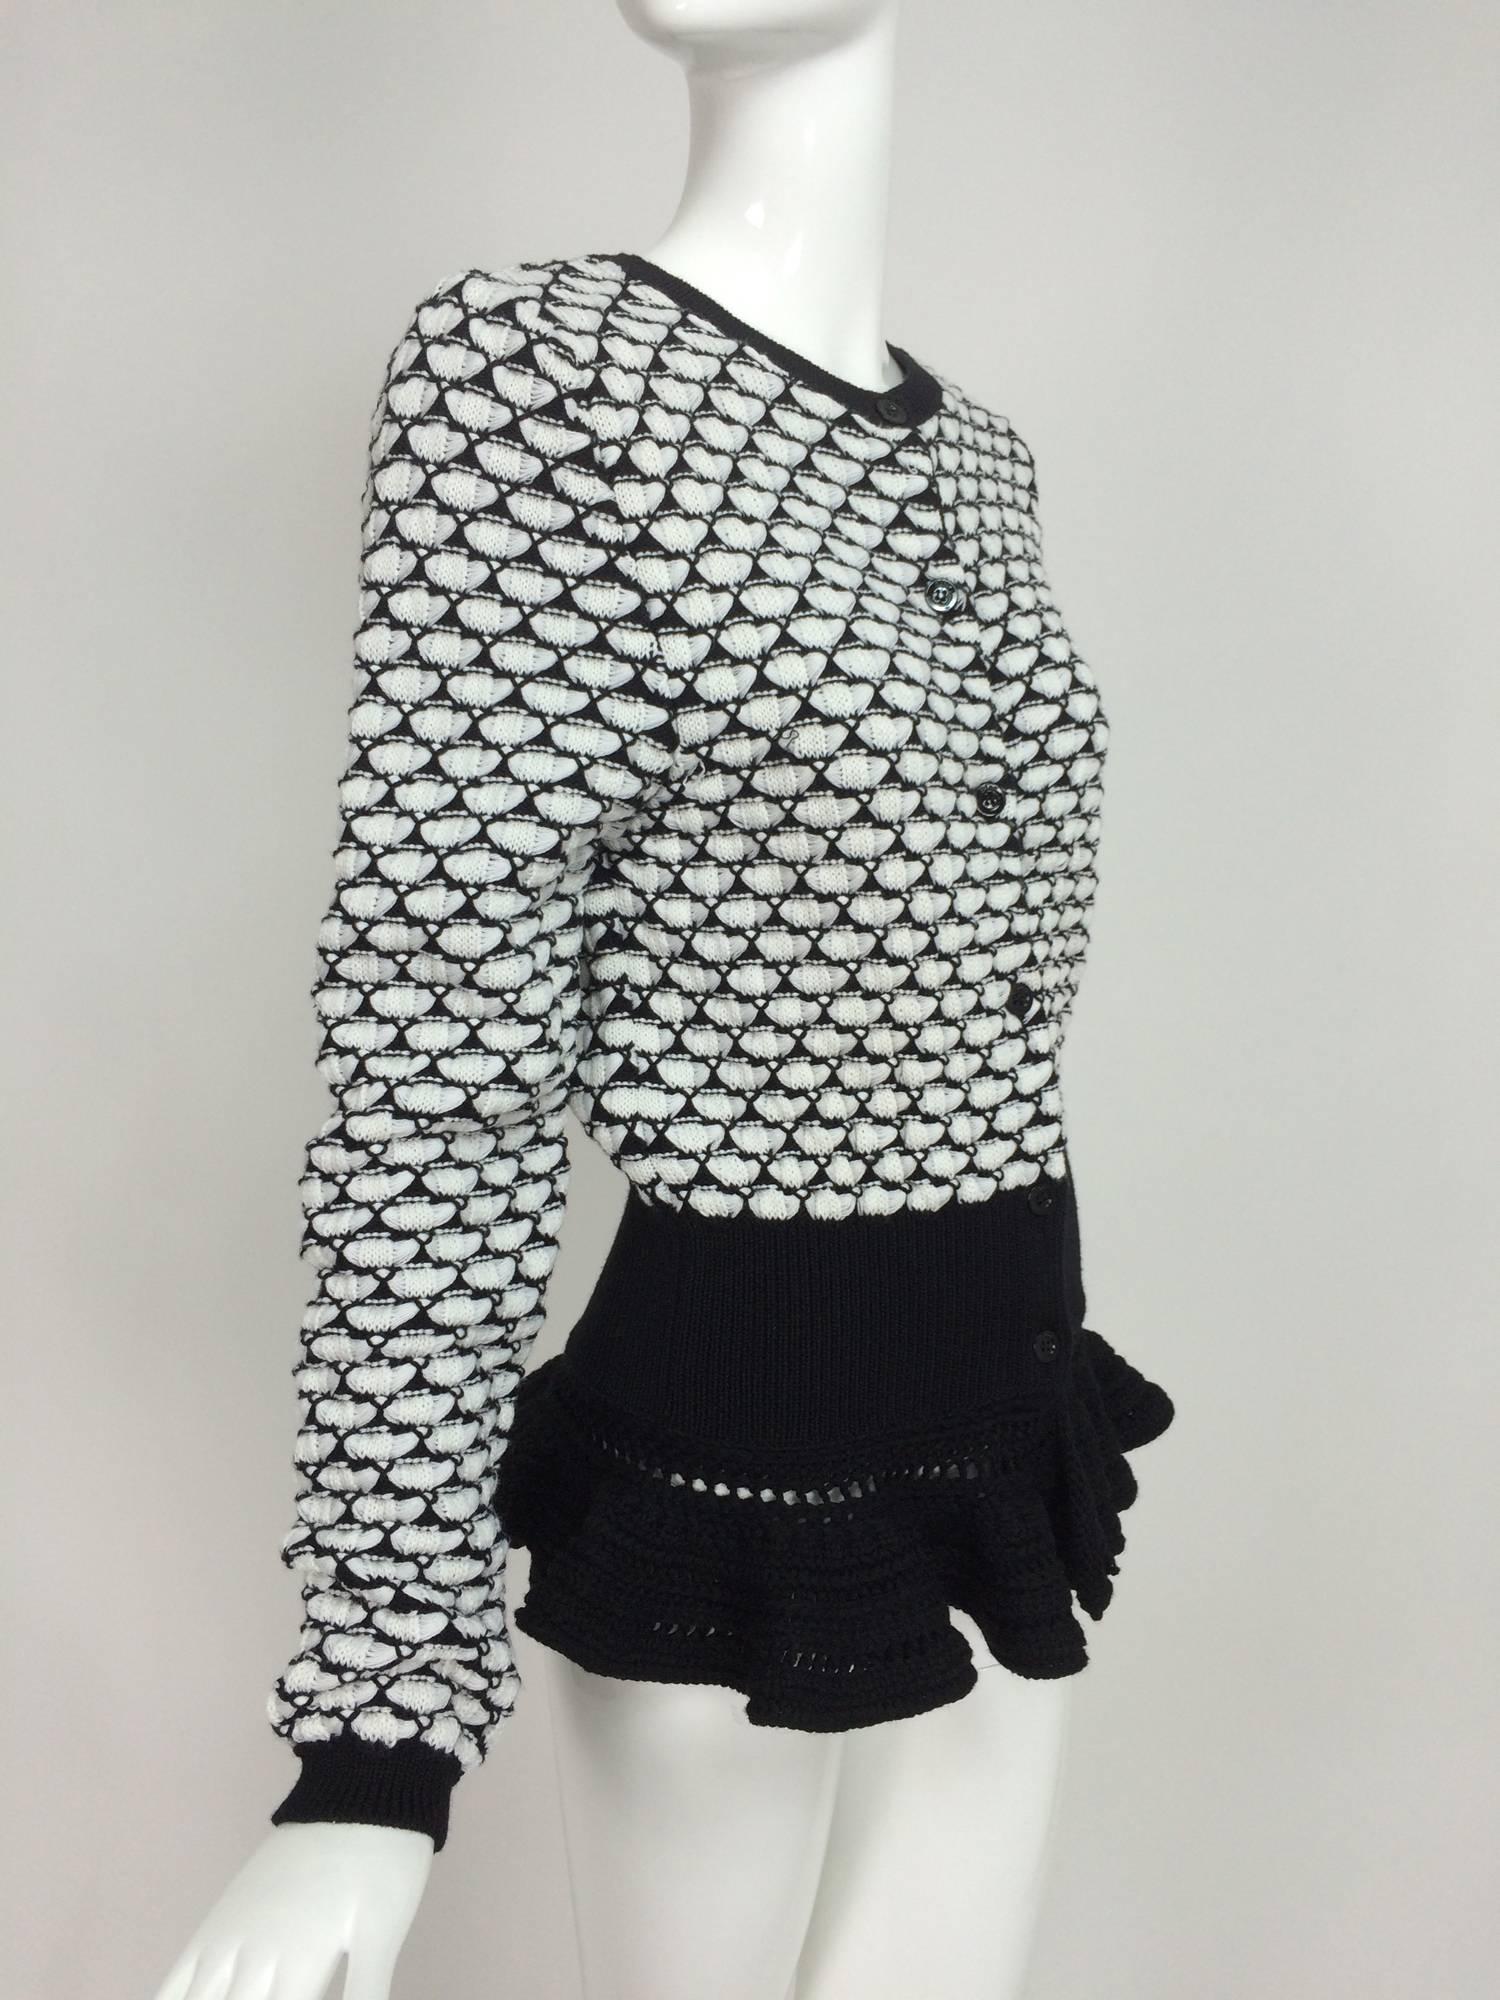 Christian Dior black & white wool knit cardigan sweater with a crochet ruffle hem...Fancy knit sweater closes at the front with buttons...Wide hip band and crochet ruffle hem...Unlined...Marked size 10 US...In excellent condition..

In excellent